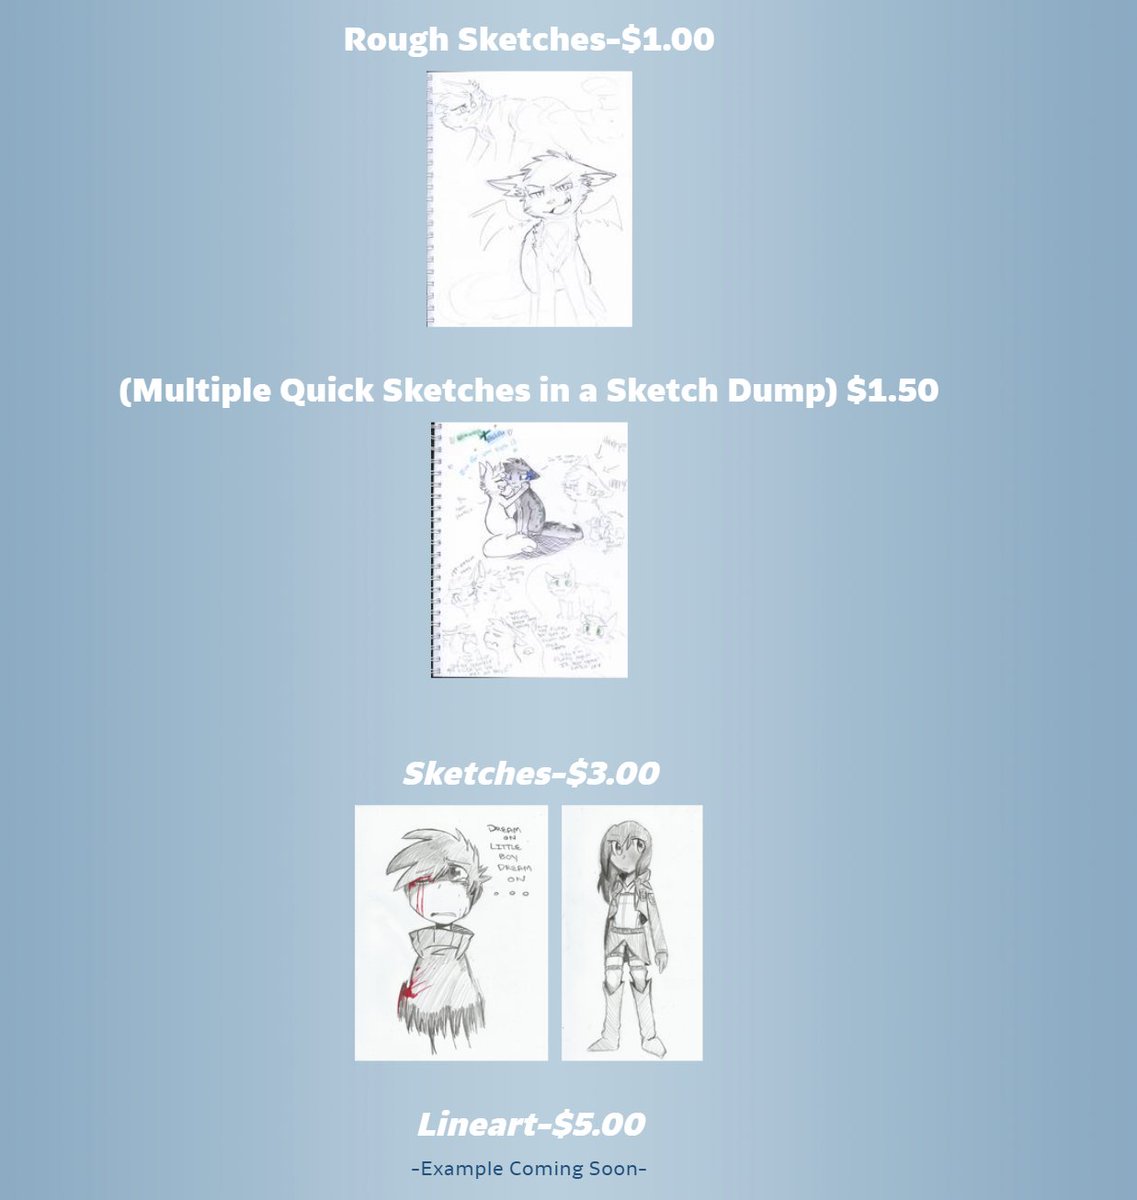 These prices are ridiculous, and they were this low because my self esteem was bad not for accessibility, dont do this ever, that "Rough Sketch" option I had should've been the $15 cap I mentioned earlier.